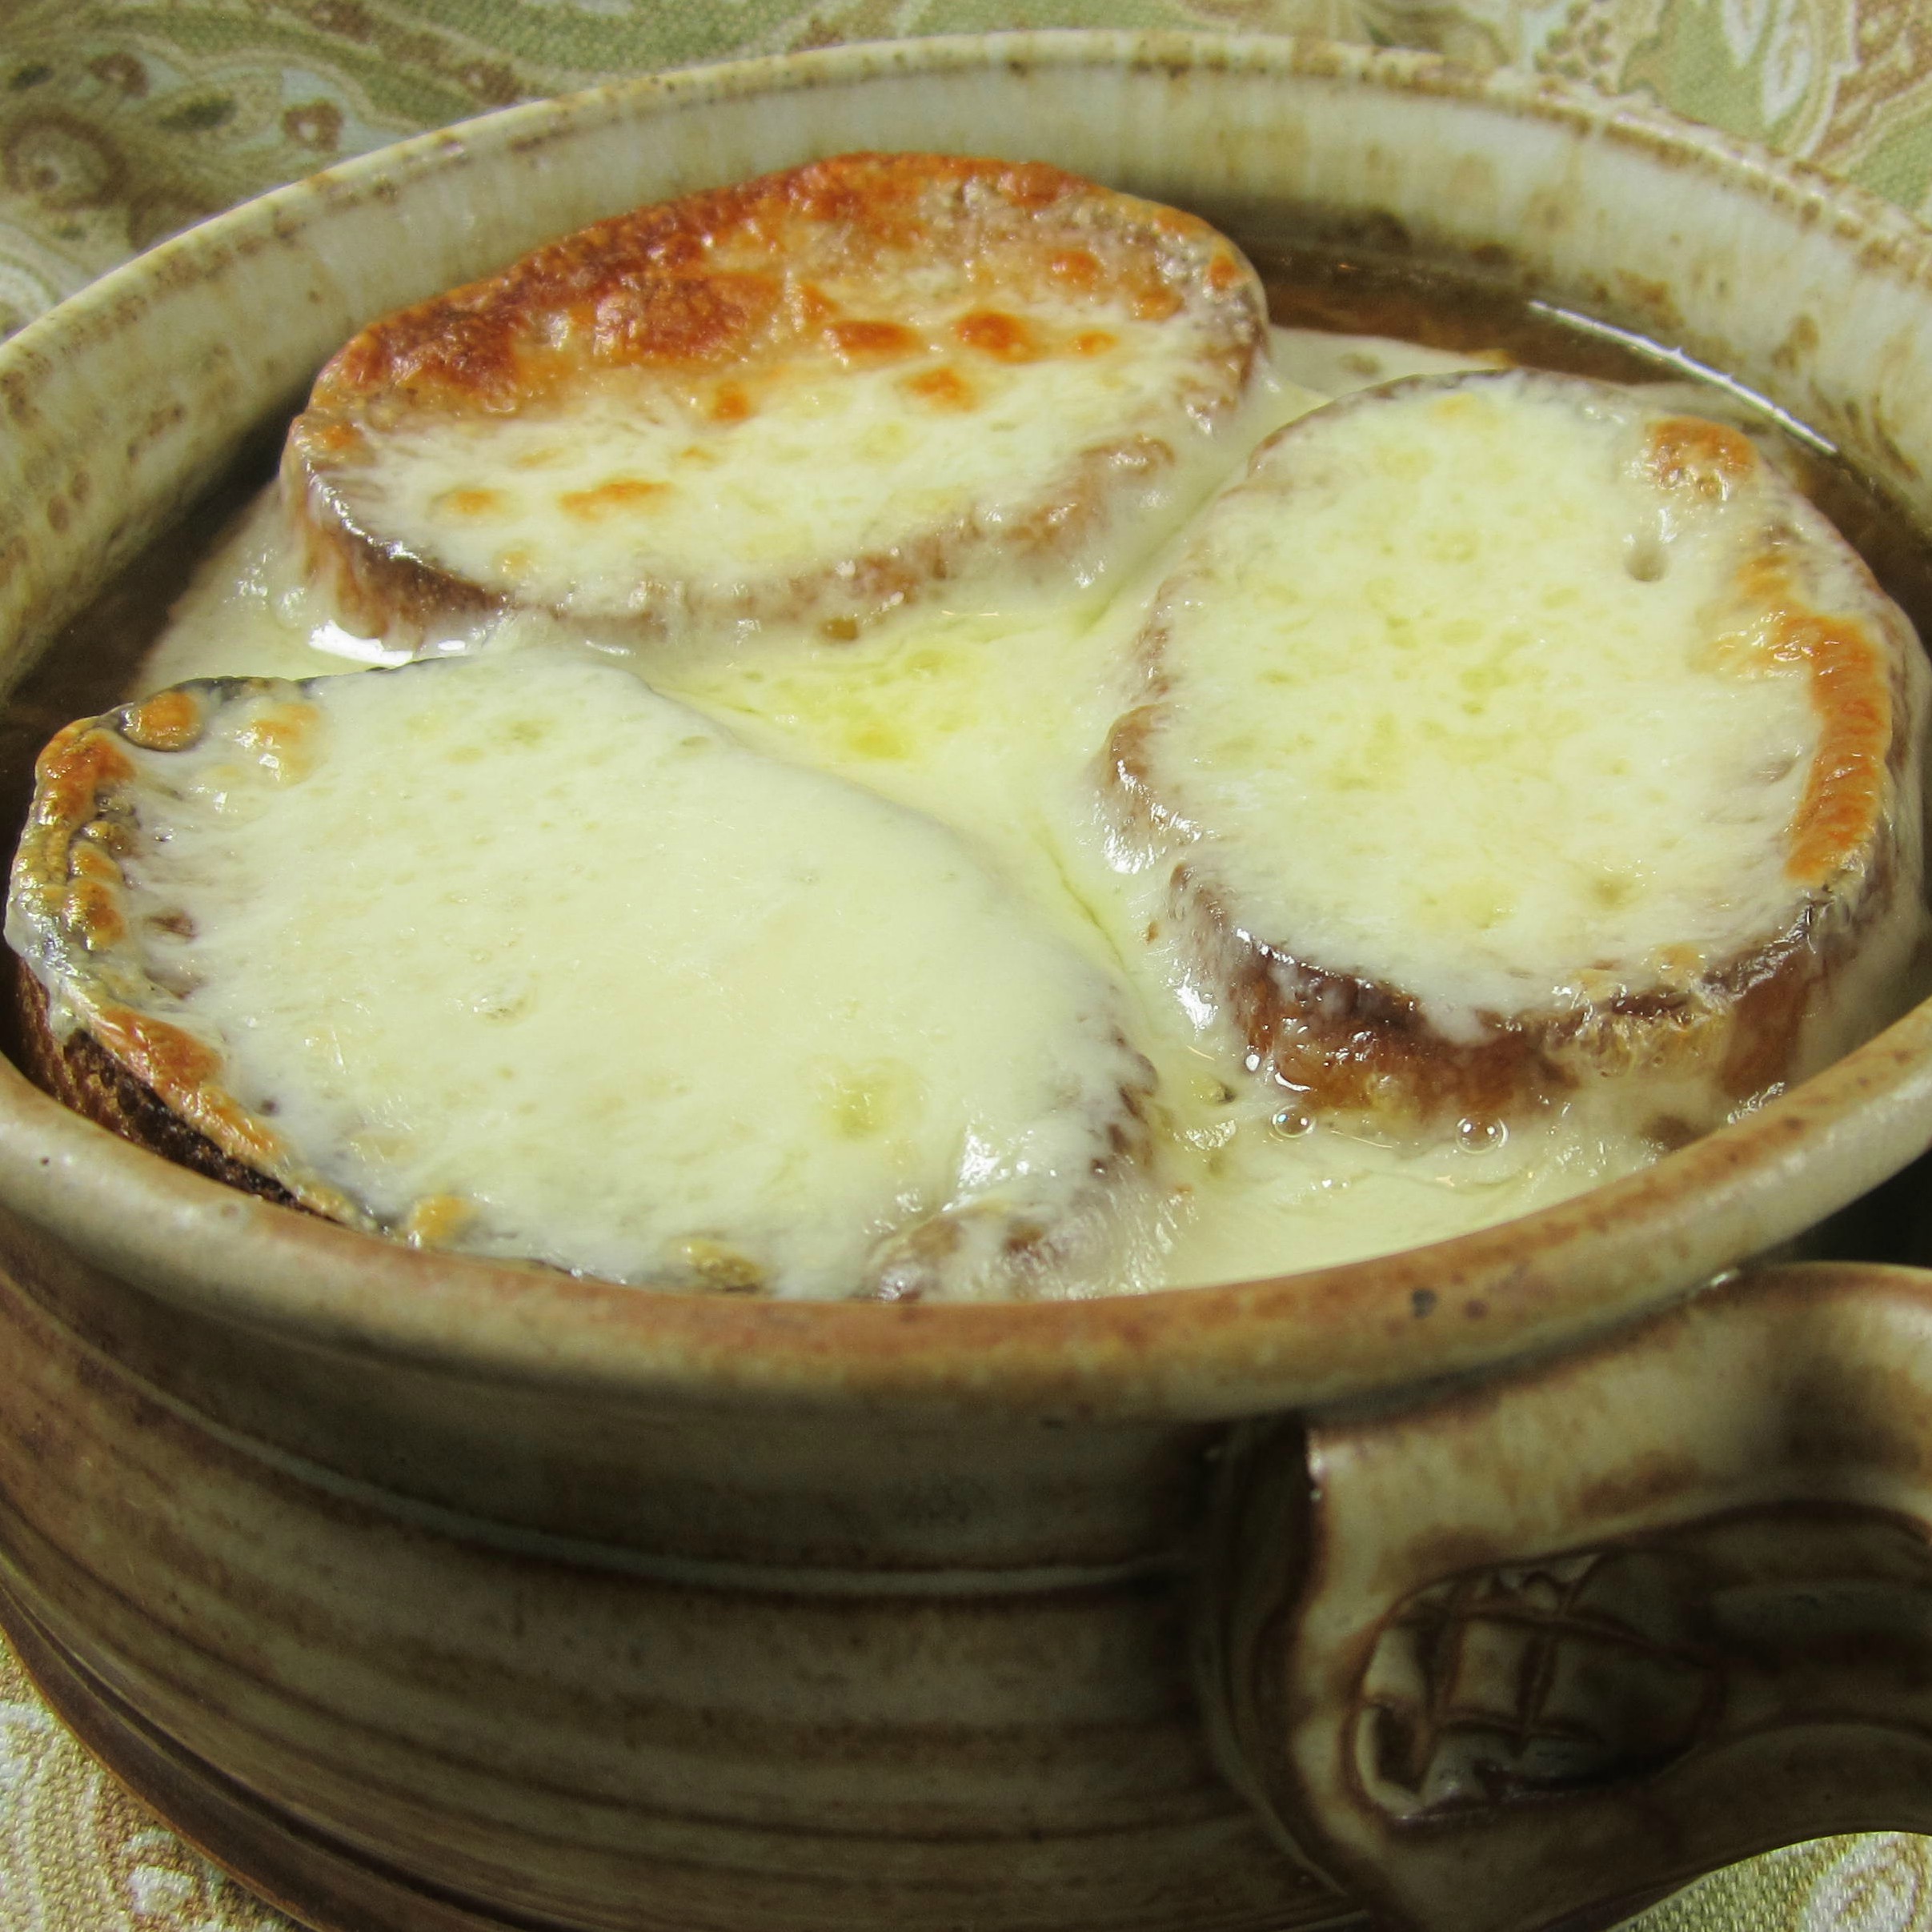 Restaurant-Style French Onion Soup Deb C